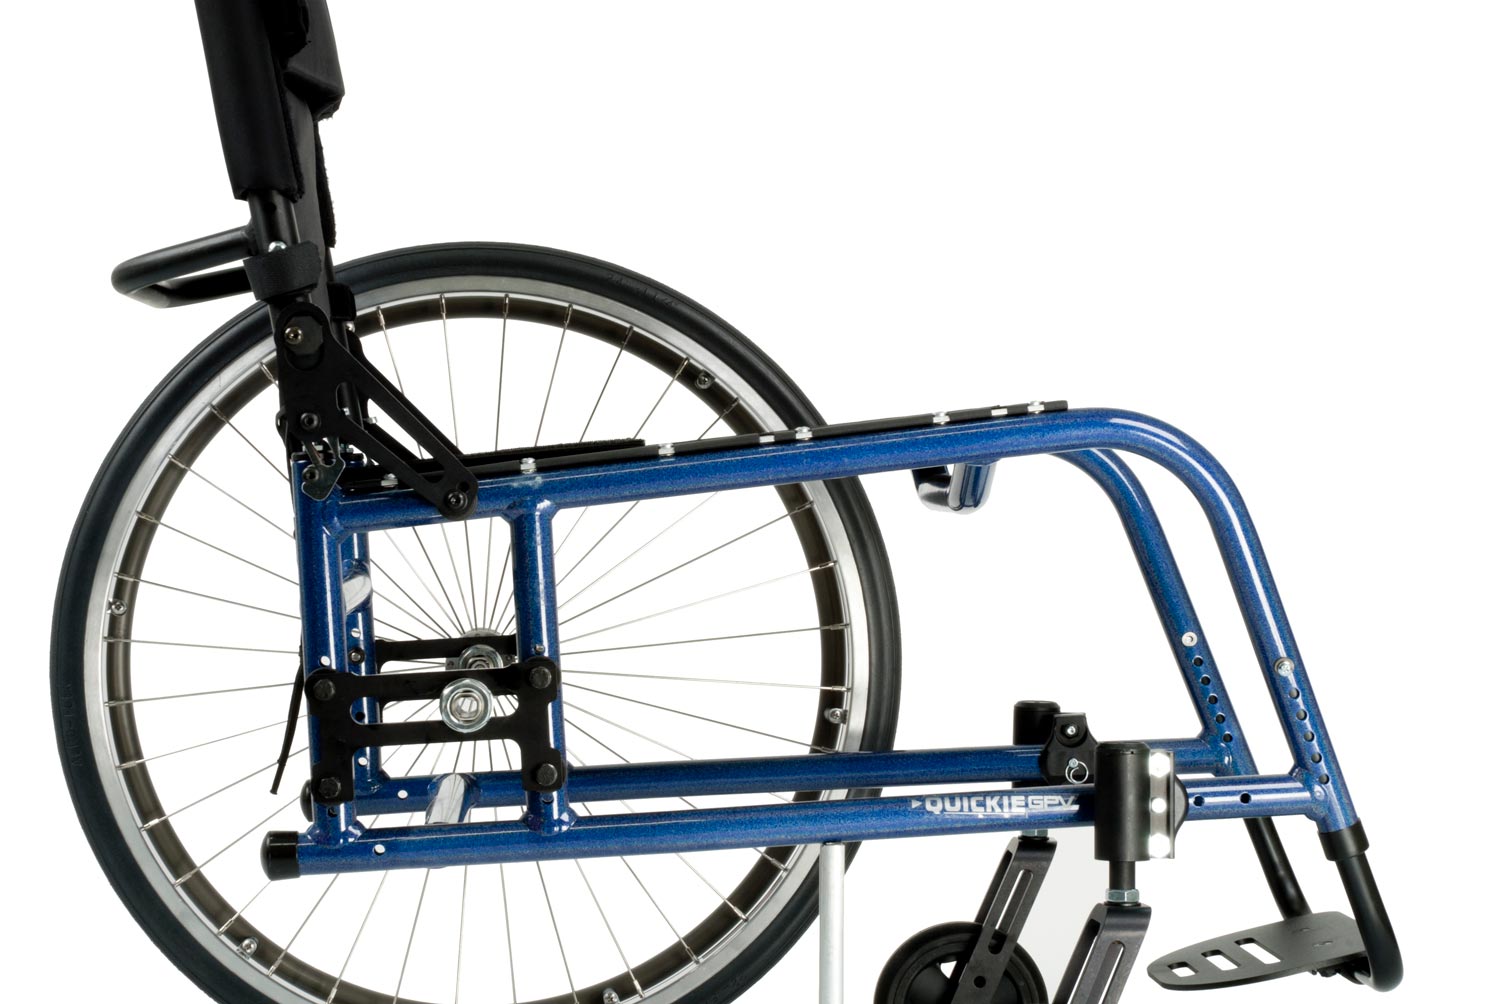 The Ultimate Rigid Frame